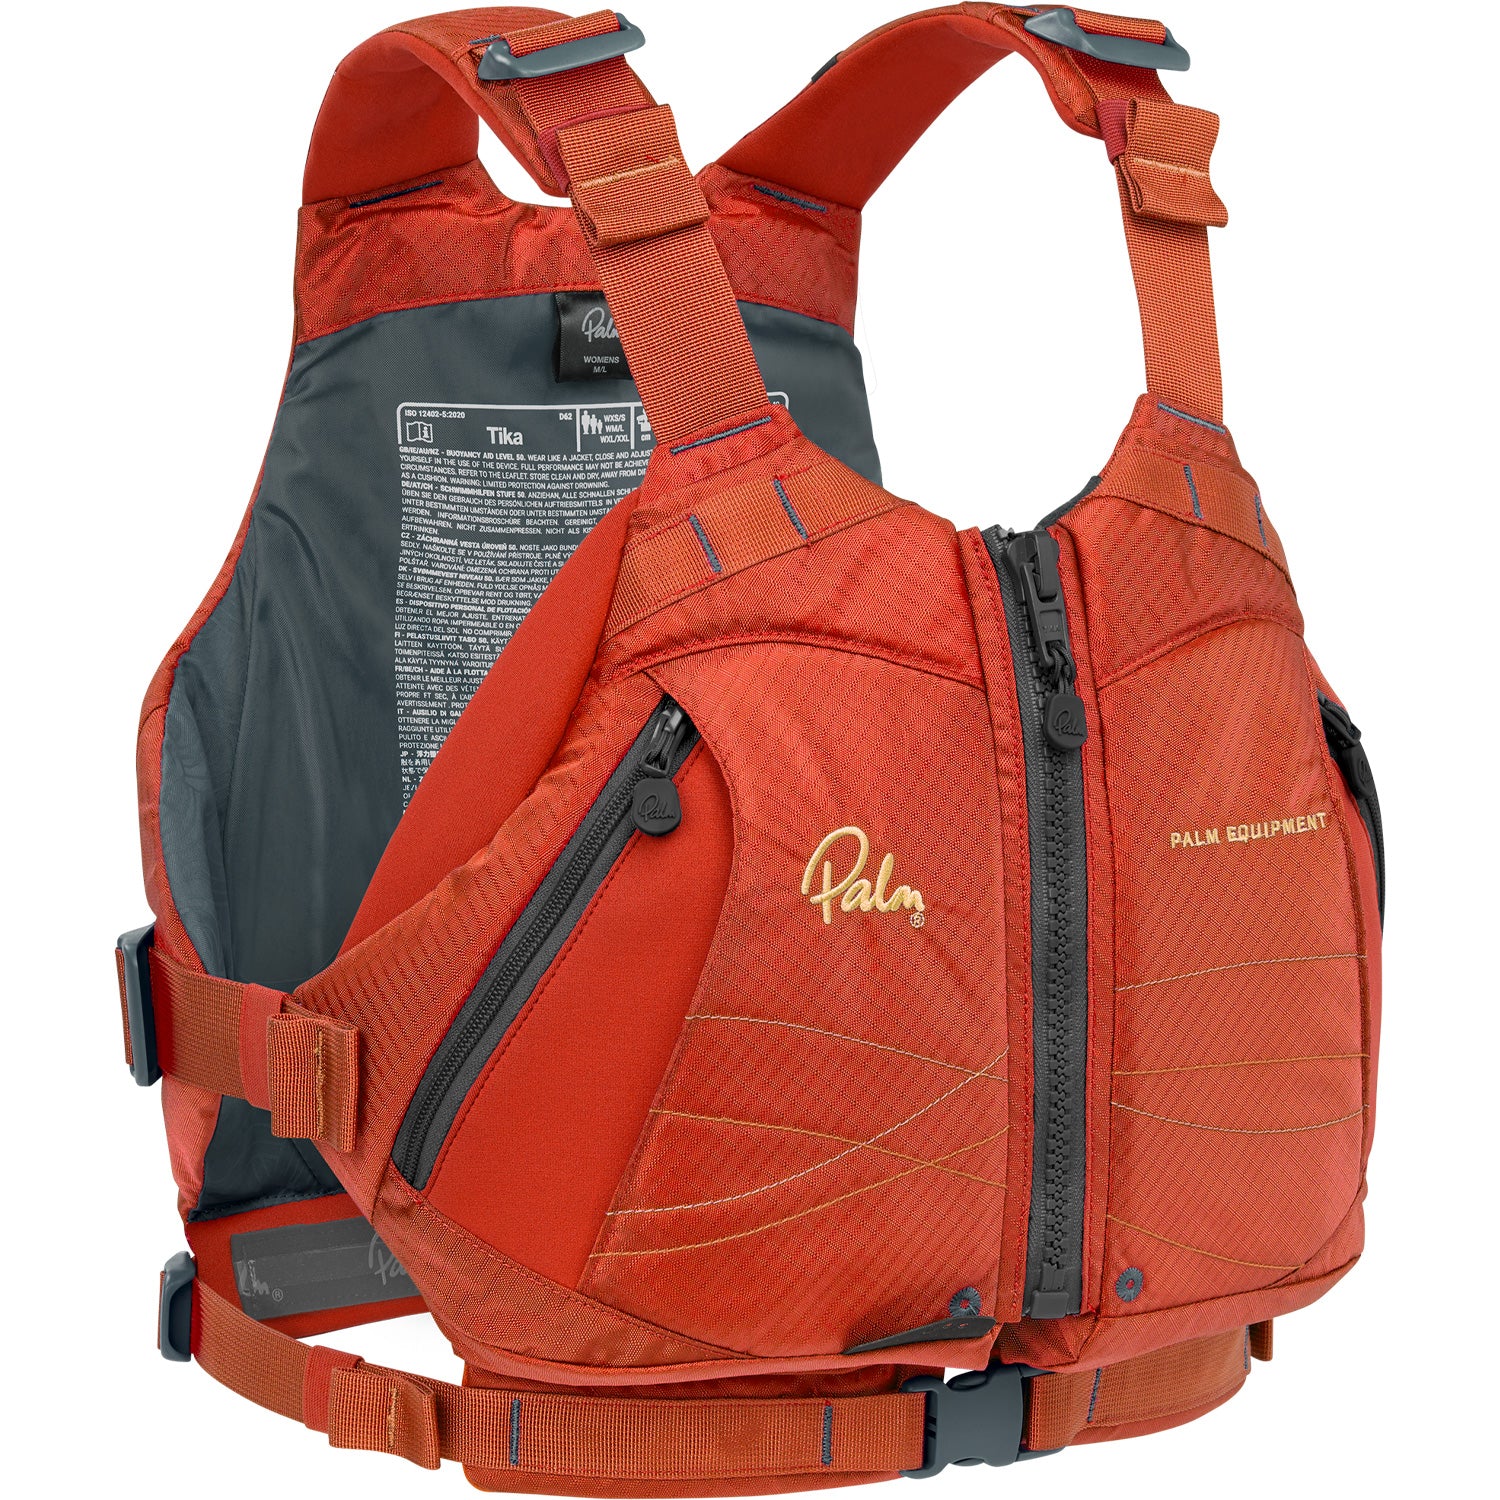 Tangerine Colouring visible on the Palm Tika pfd for Women